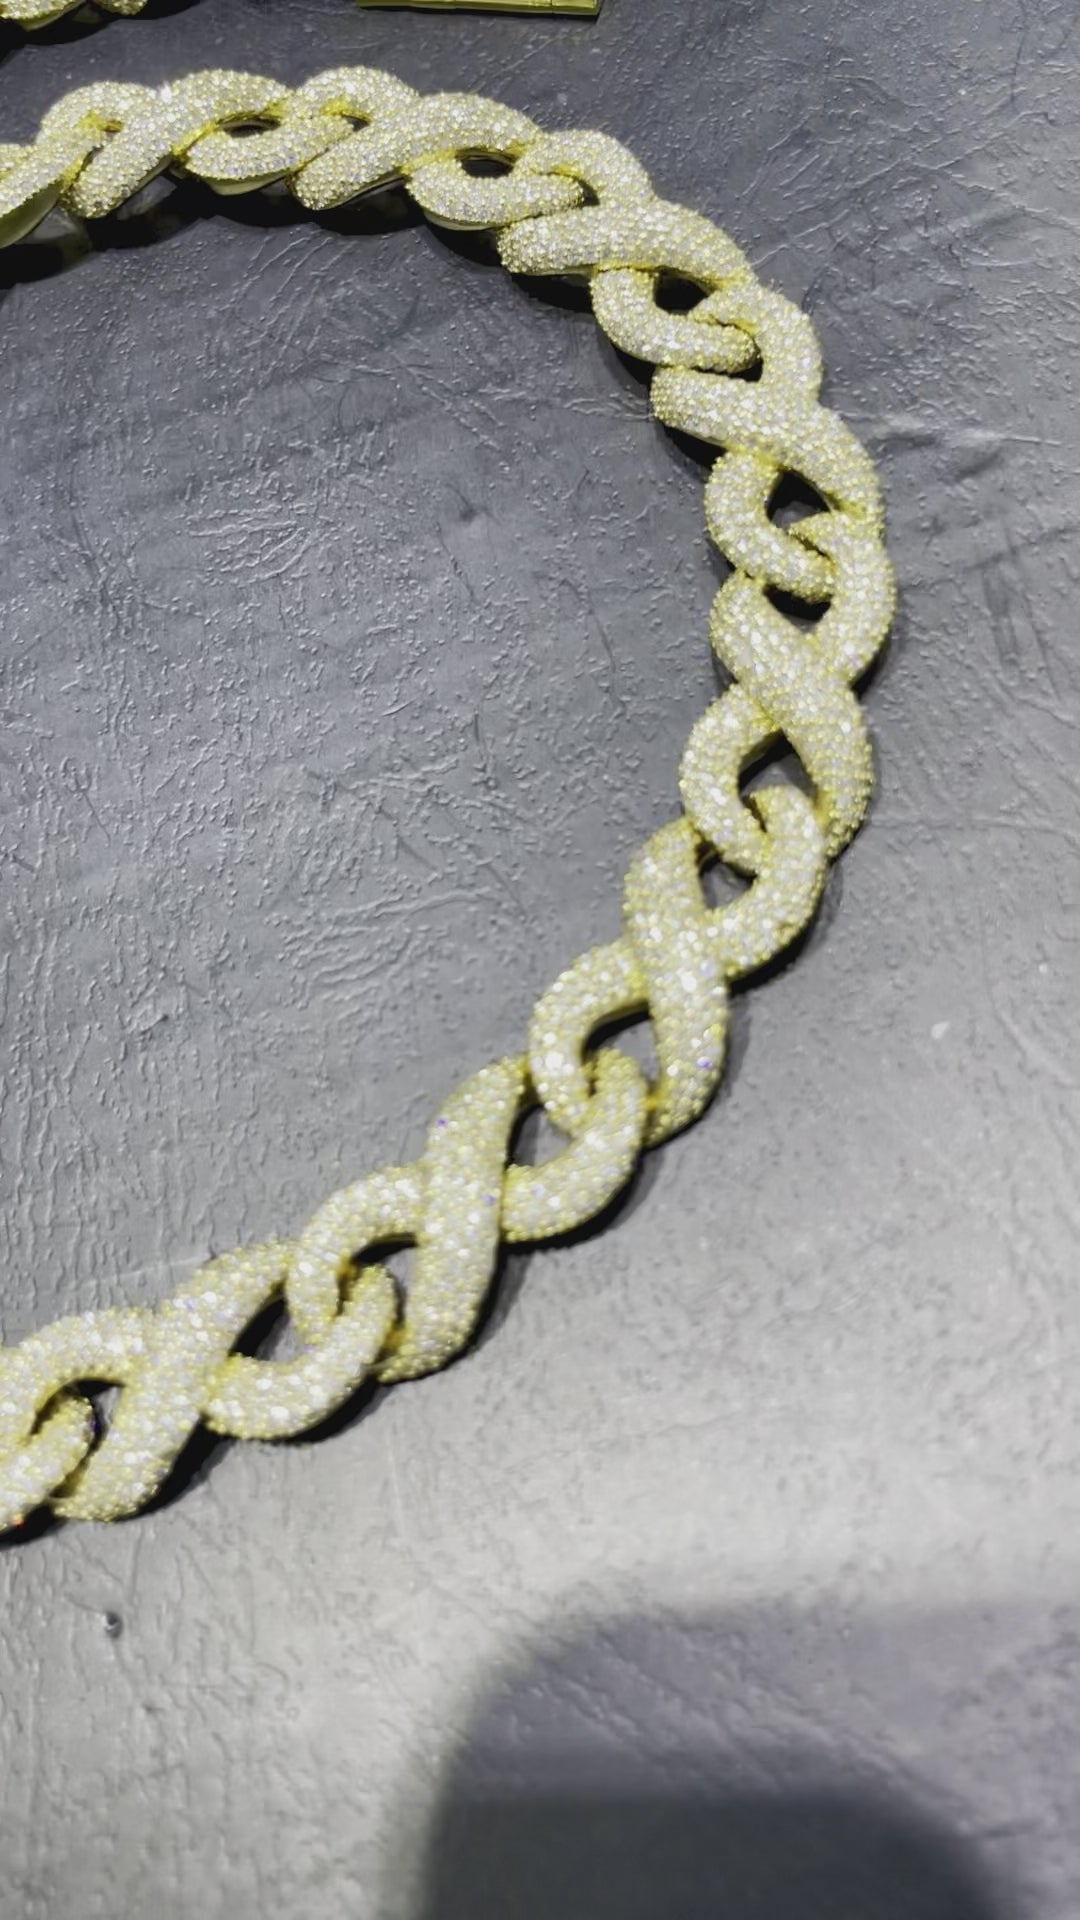 VVS1 "ICED Bust Down" 14k Infinity Link Migos Chain